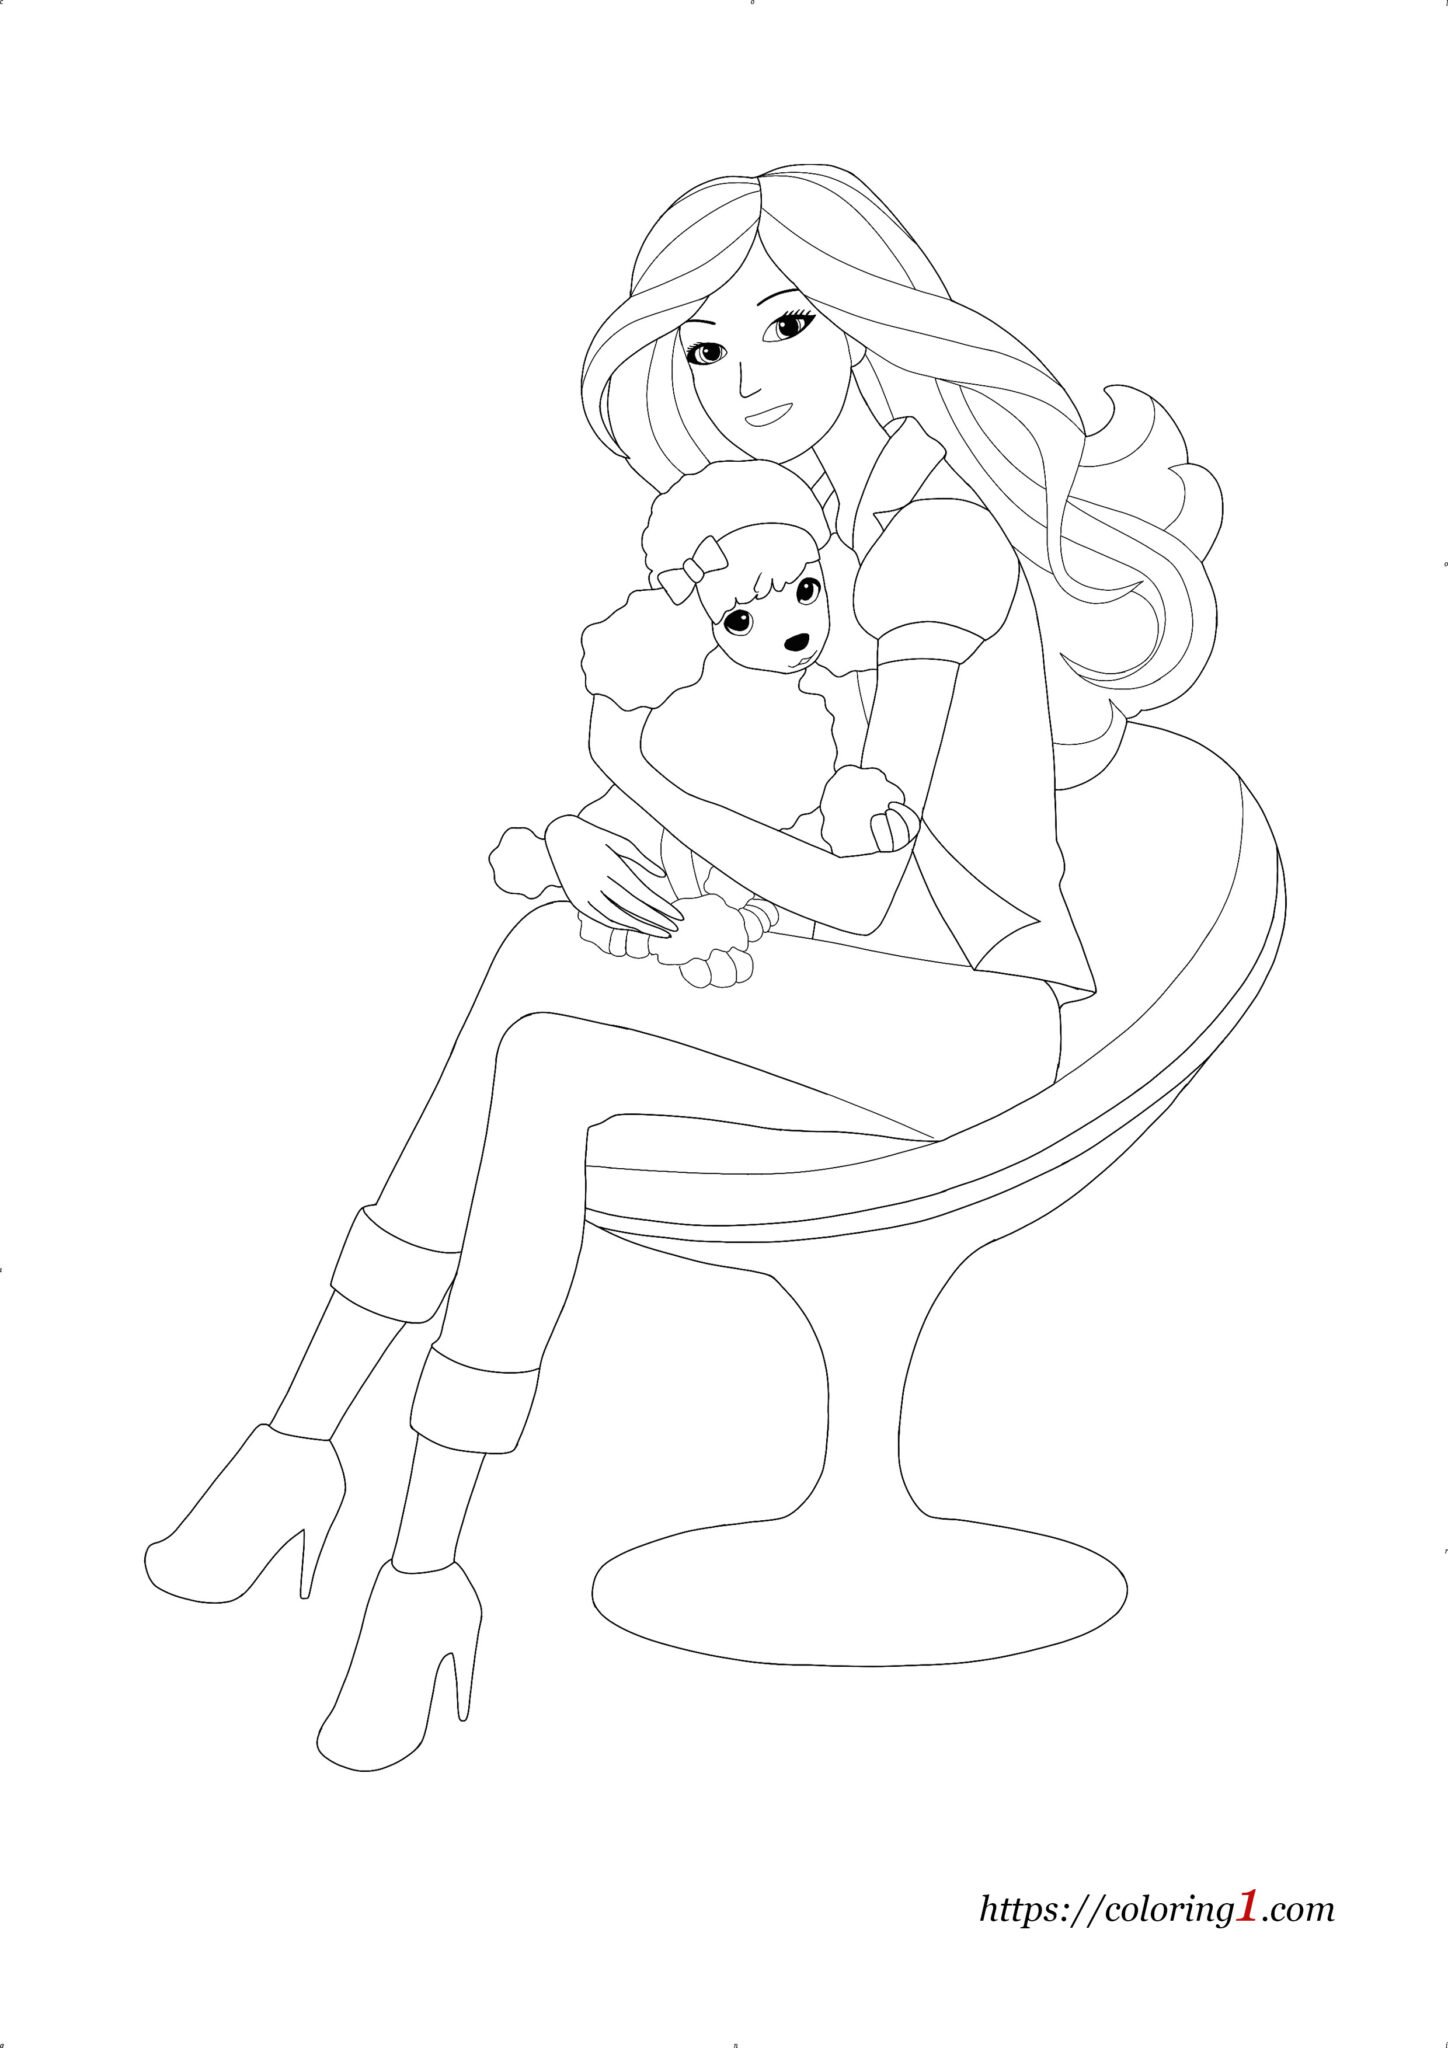 Barbie with Dog Coloring Pages - 2 Free Coloring Sheets (2021)